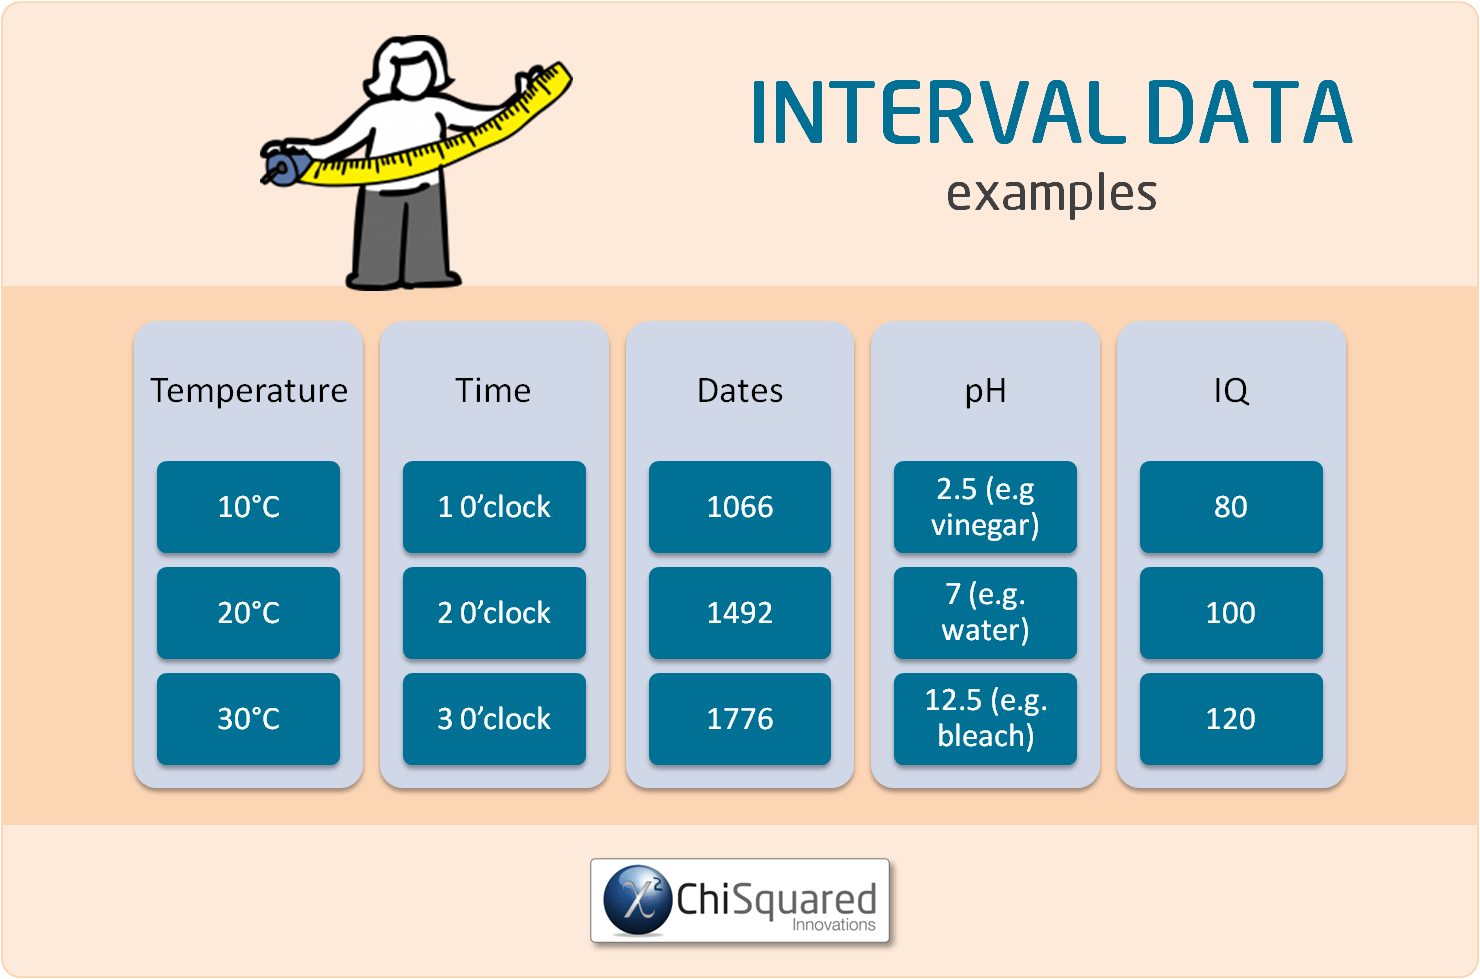 Examples of Interval Data